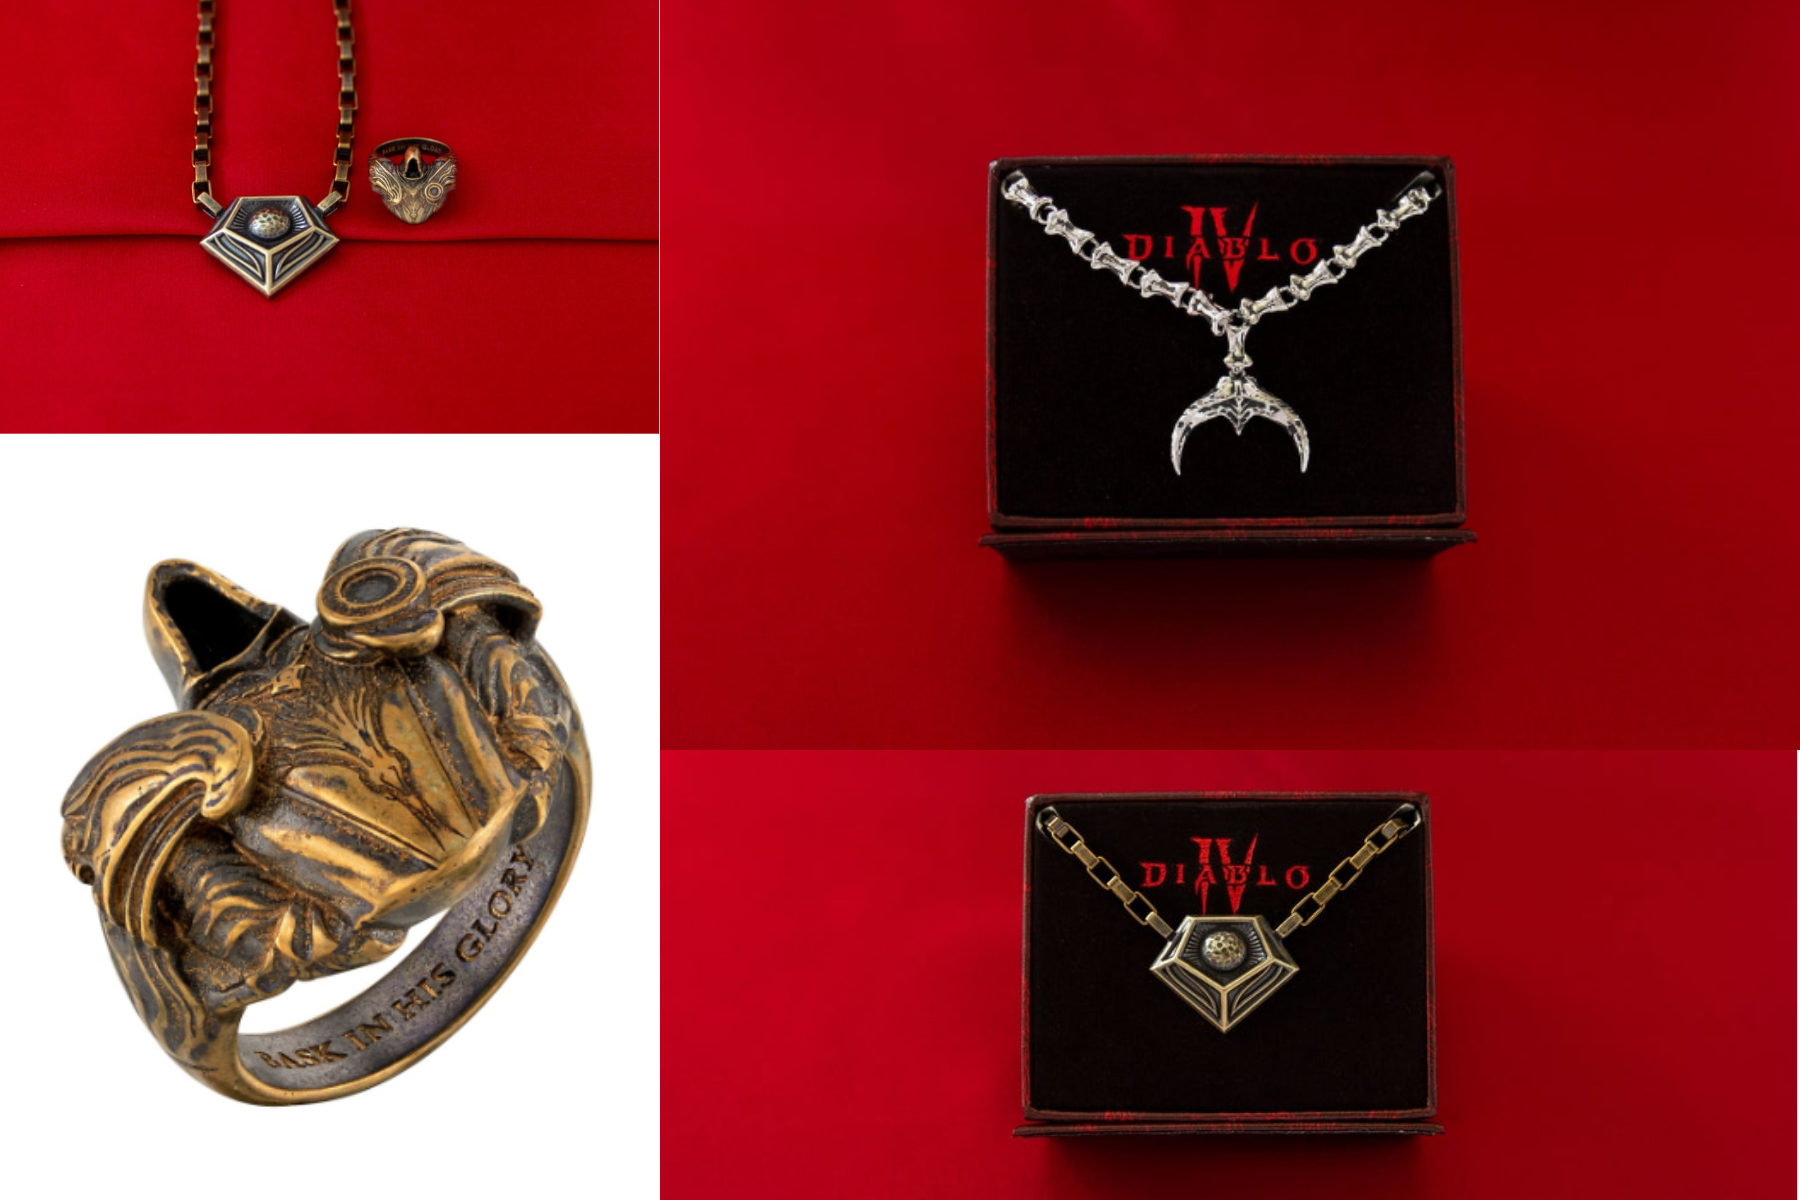 Four collections of The RockLove x Diablo jewelry